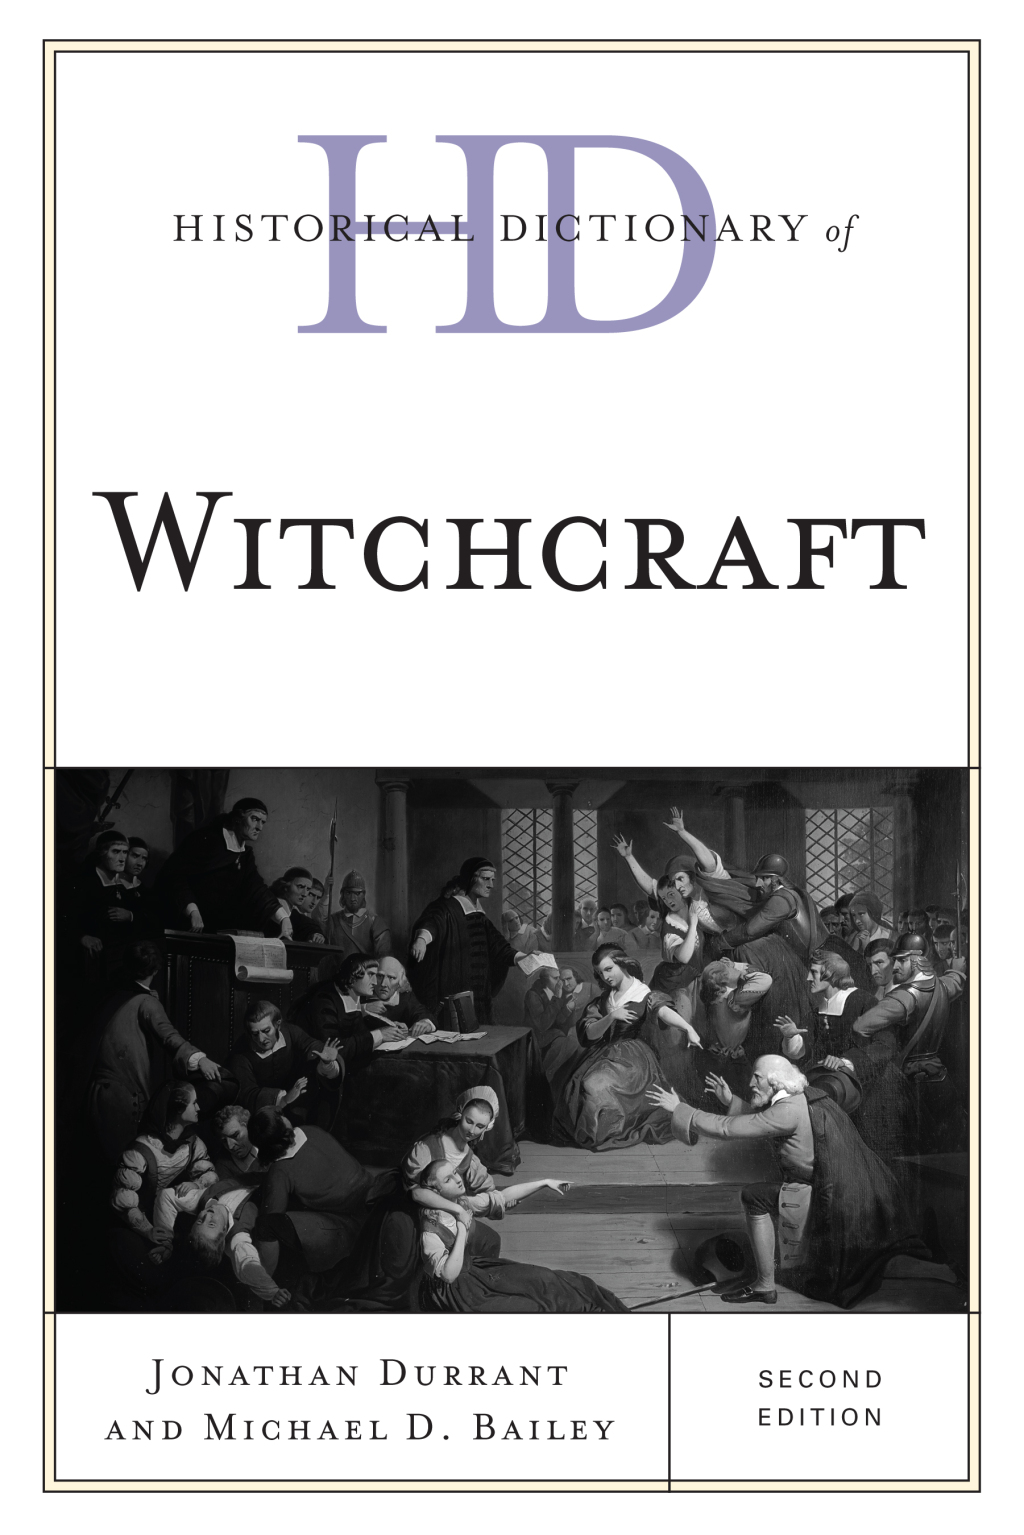 Historical Dictionary of Witchcraft - 2nd Edition (eBook Rental)